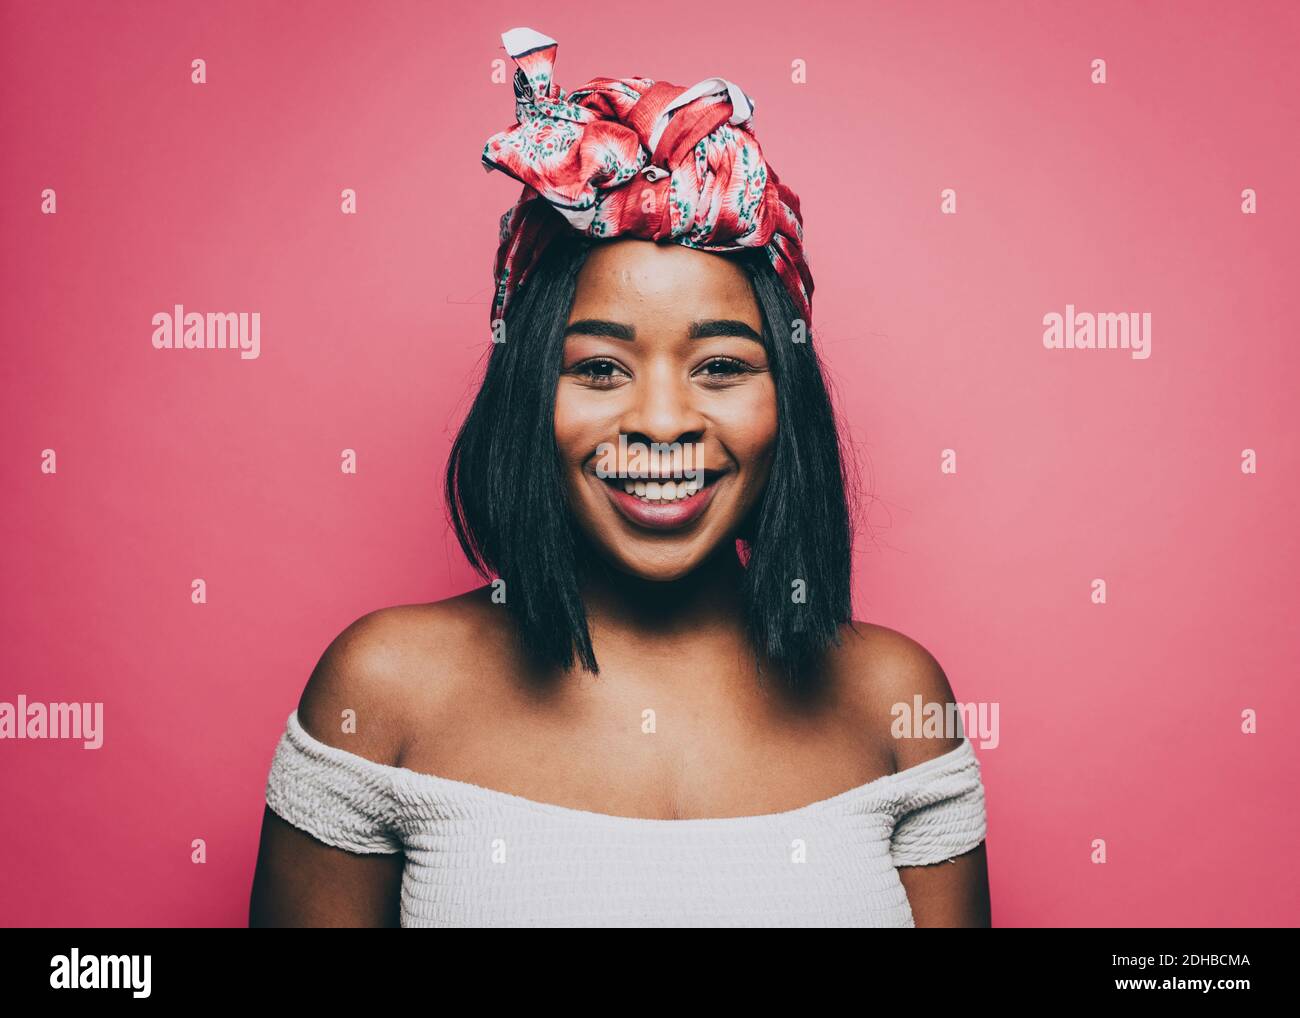 Portrait of smiling woman wearing head tie over pink background Stock Photo